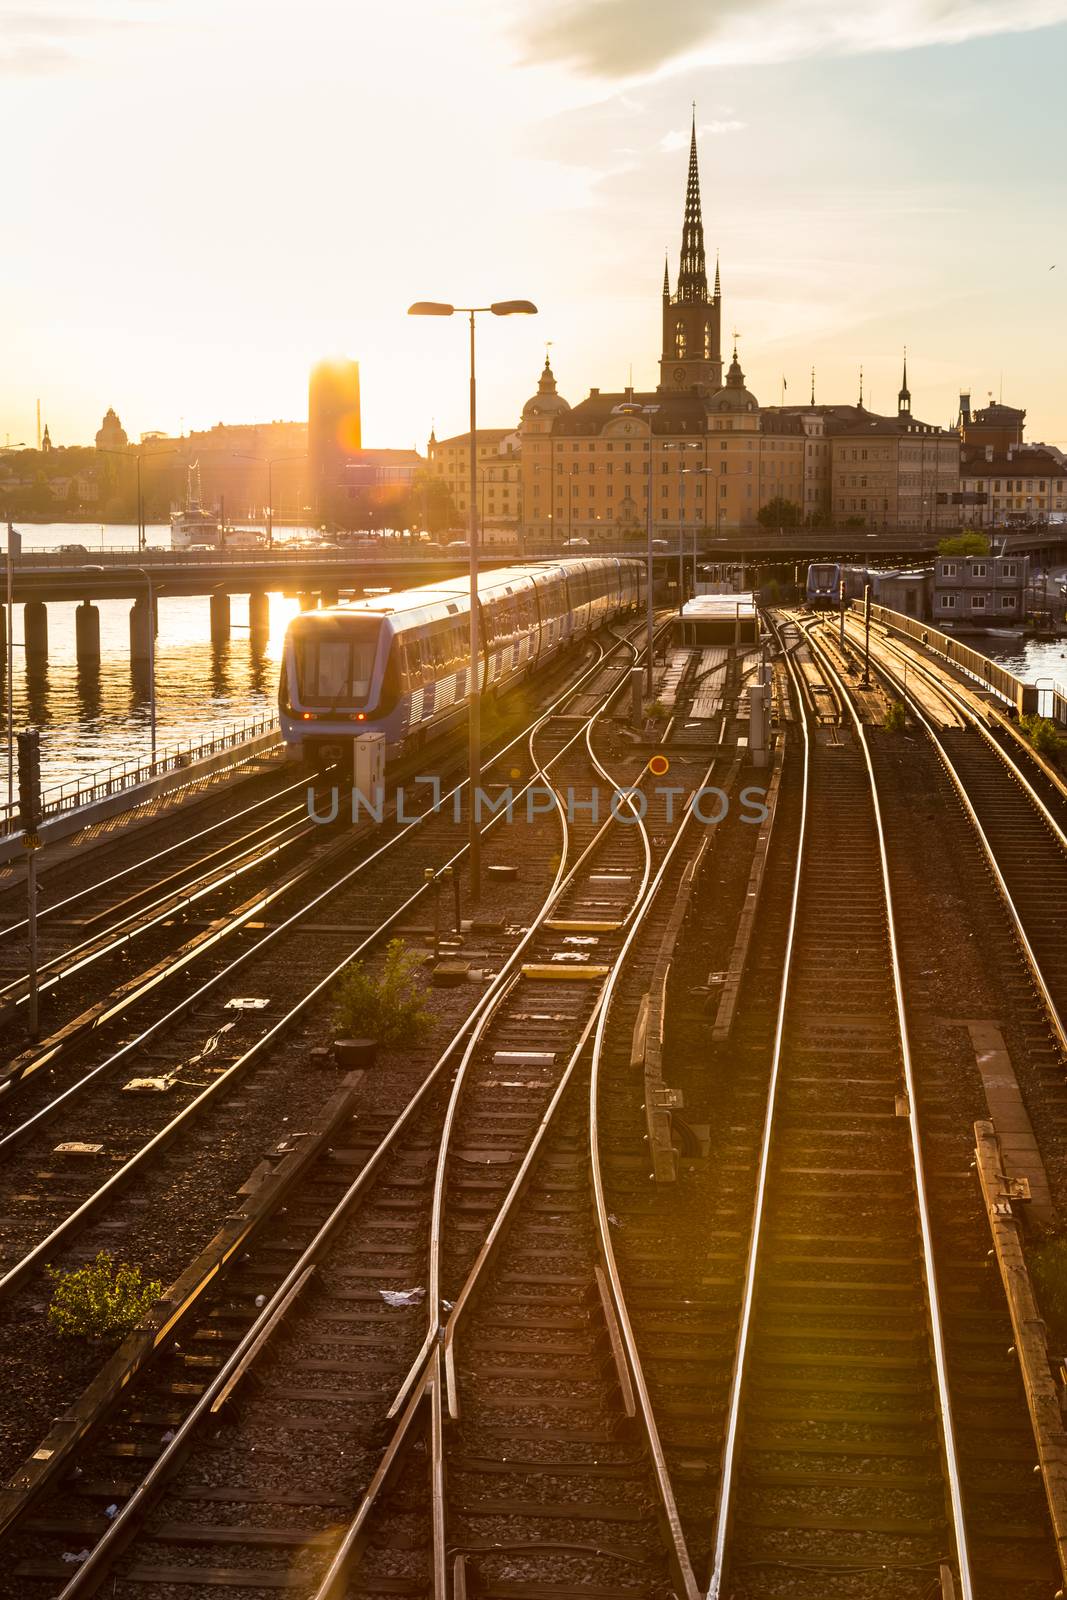 Railway tracks and trains in Stockholm, Sweden. by kasto